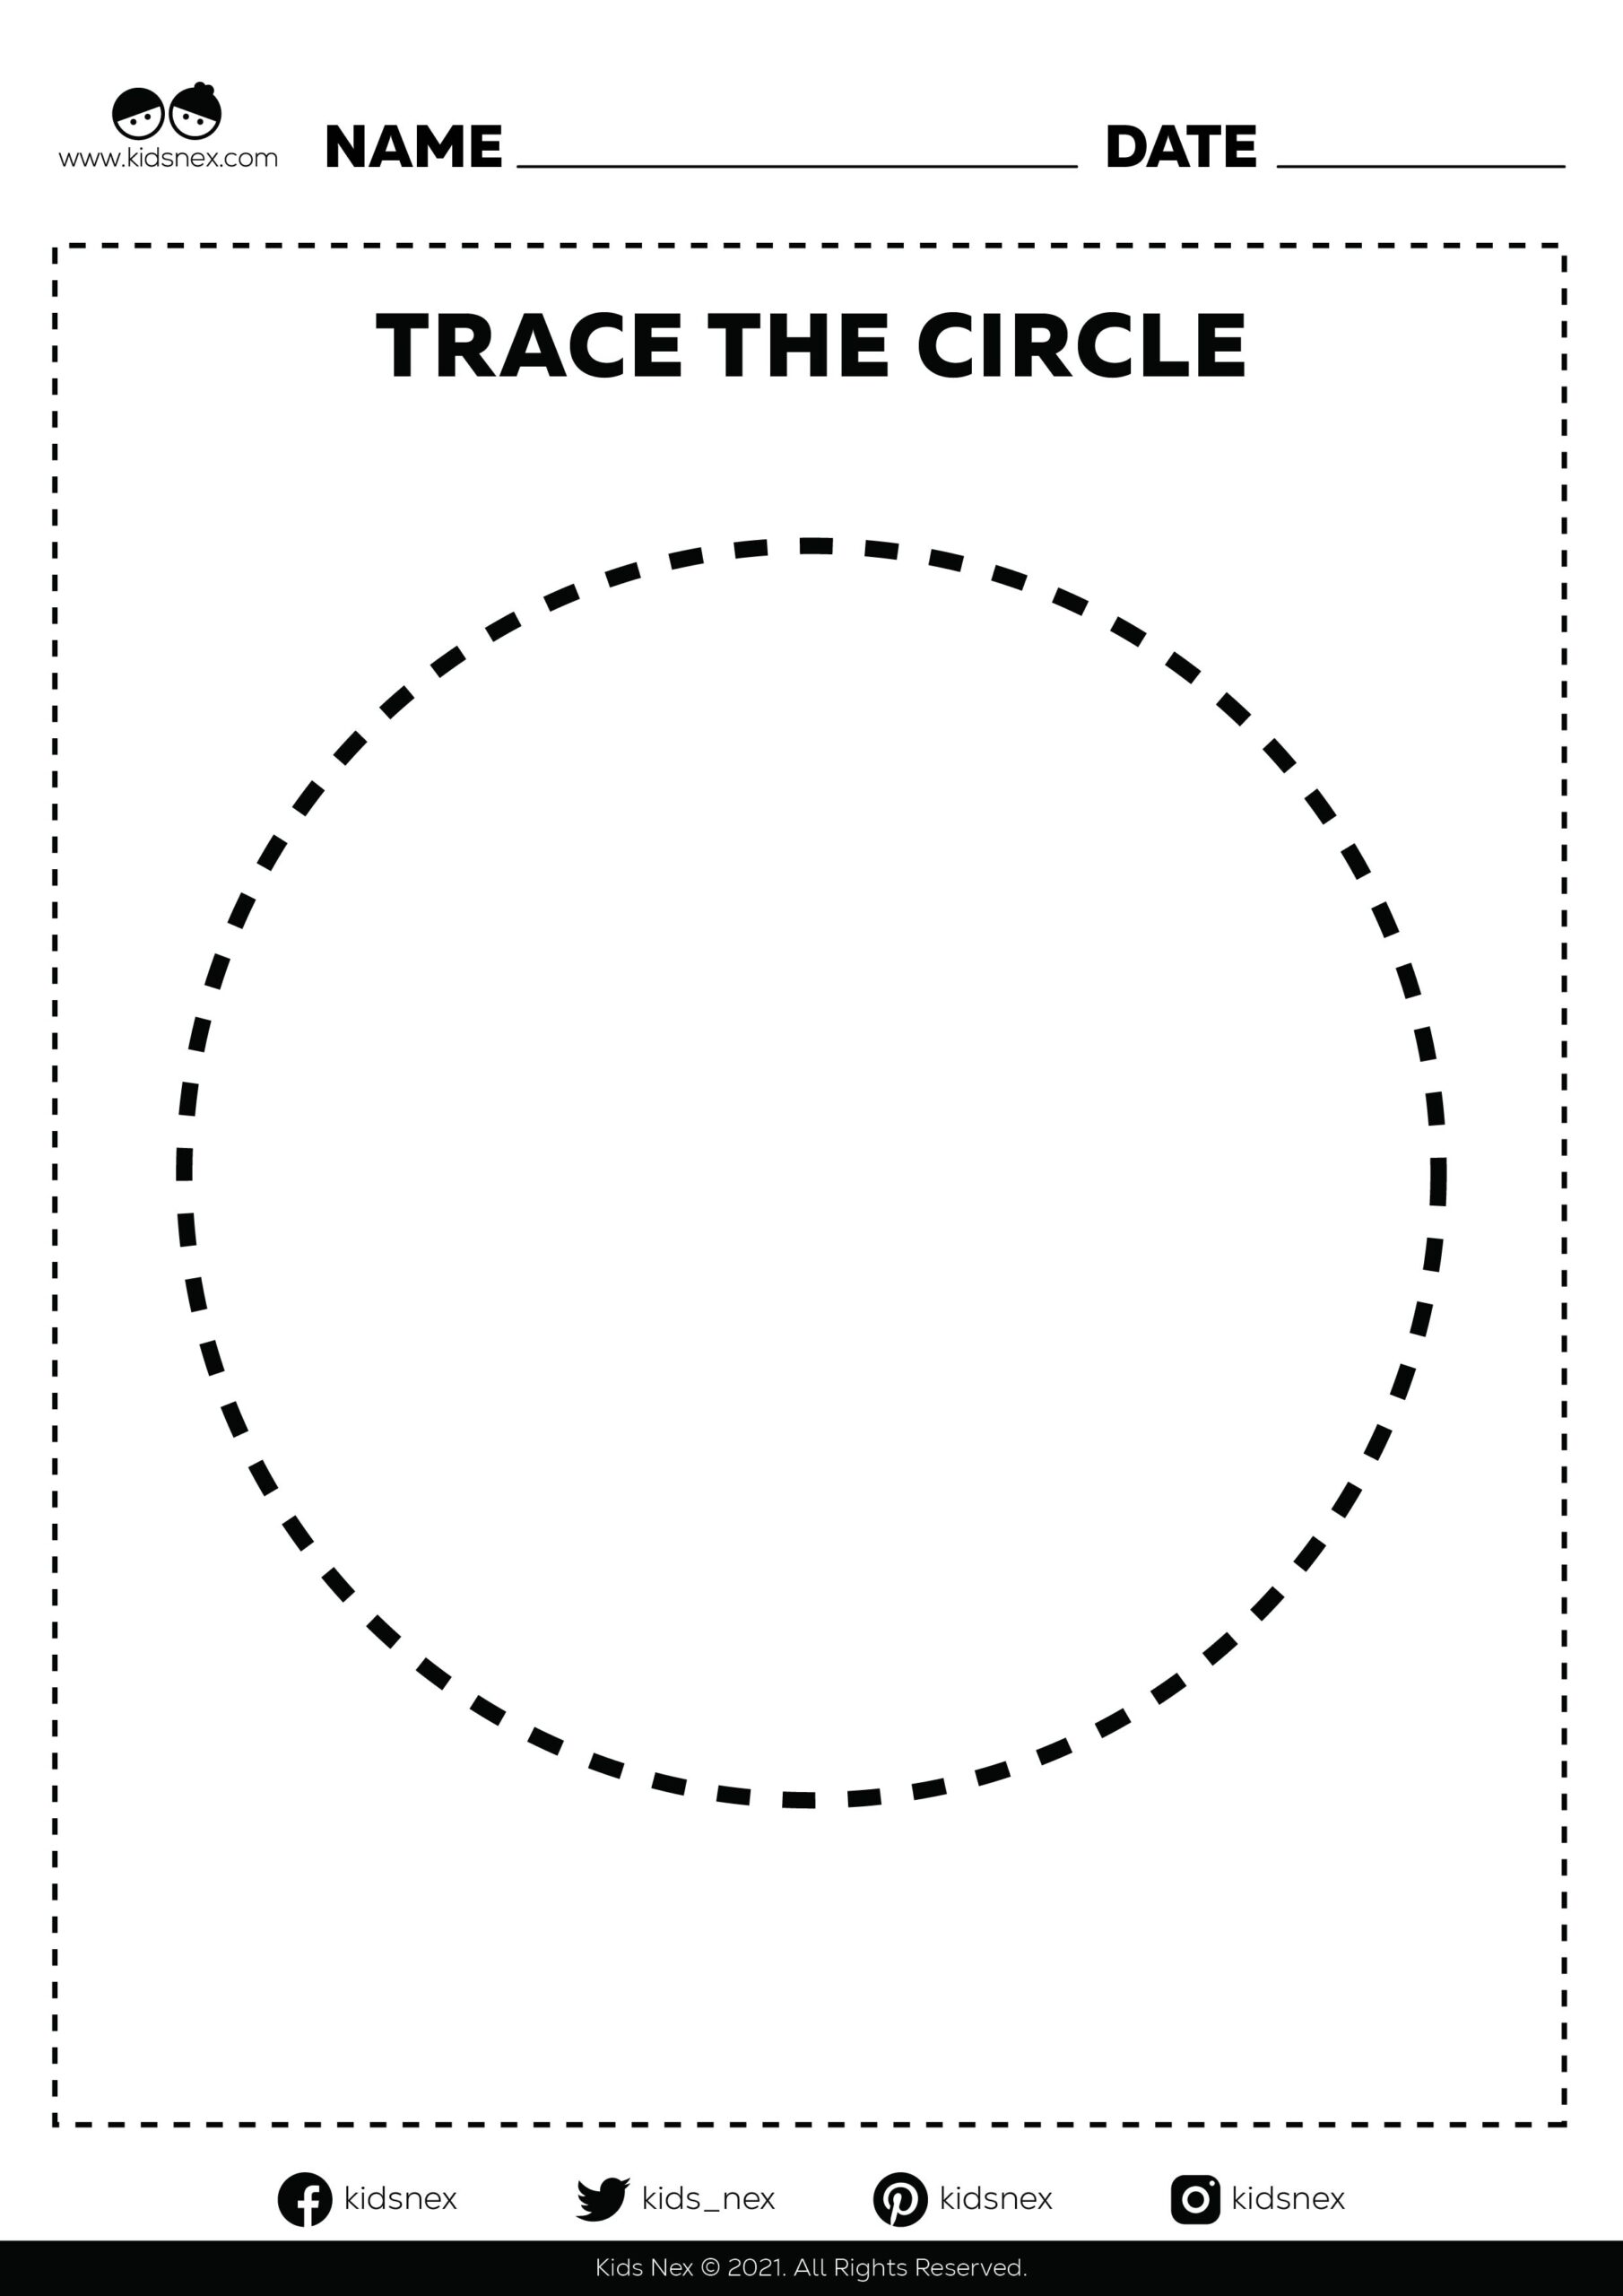 Free printable trace and circle worksheet for preschoolers and kindergarten kids for easy activities.